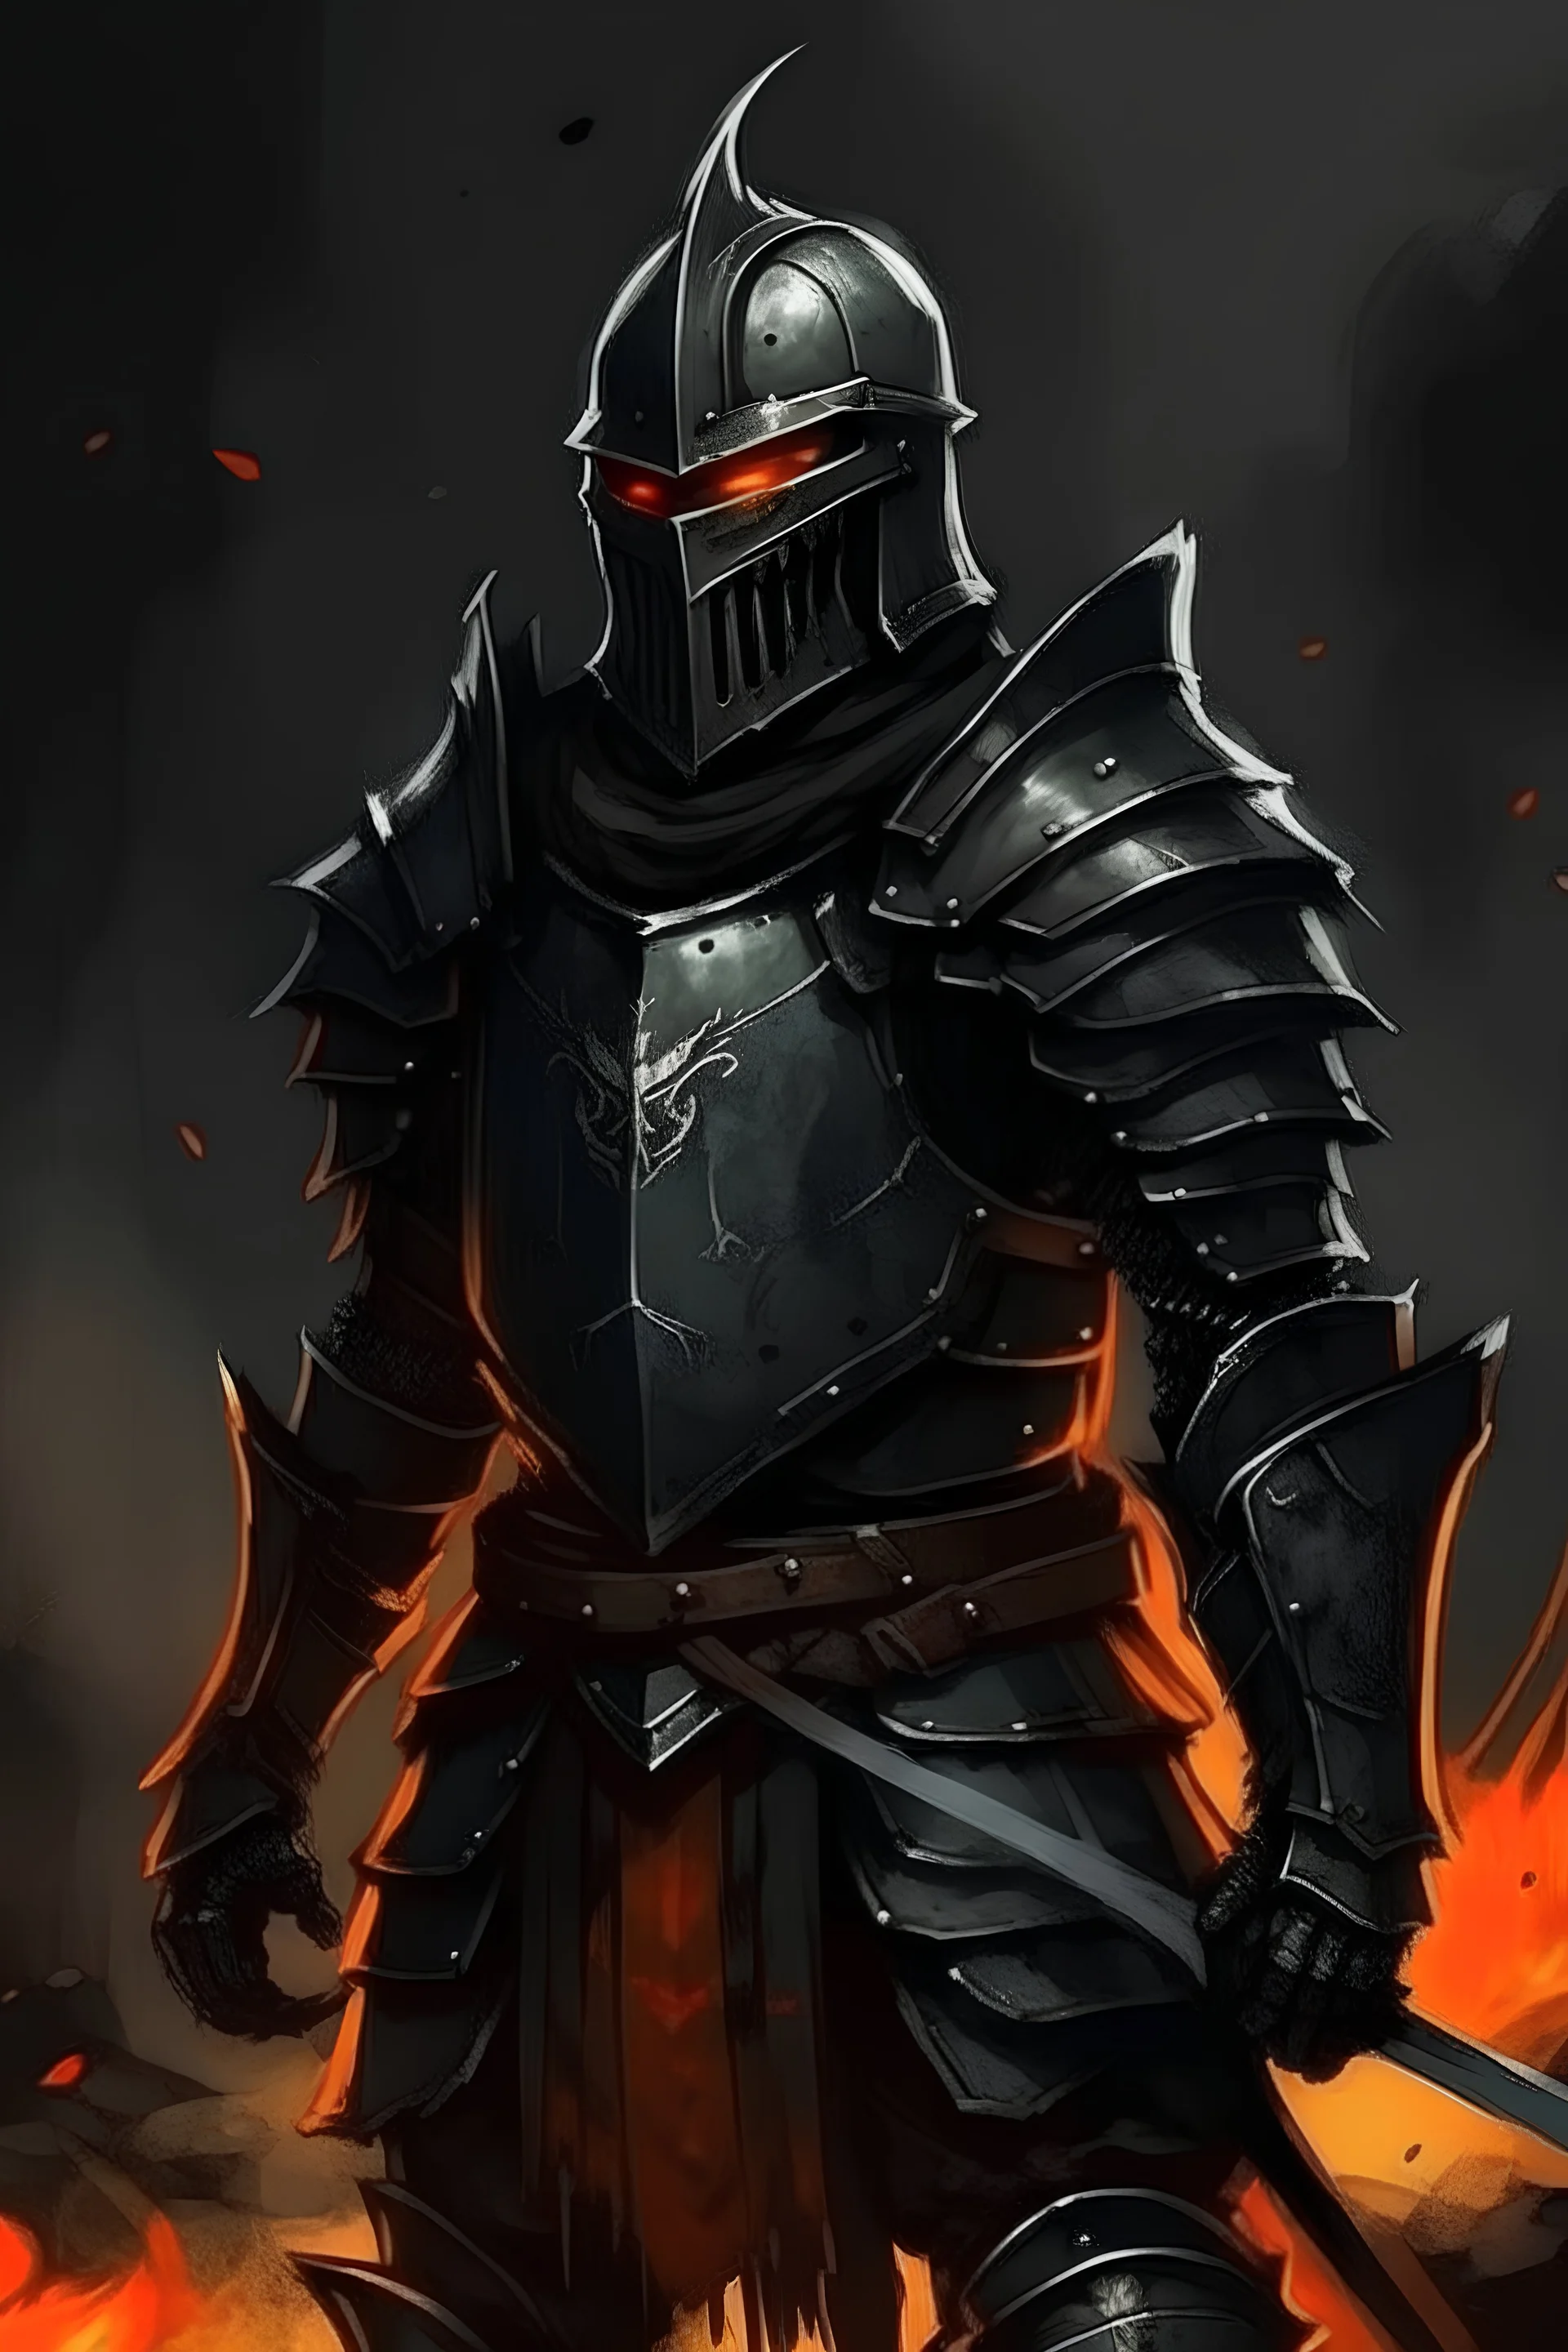 make a painting of a knight in black fire armor in the style of dark fantasy comics, the knight wears no helmet and is Lancelot